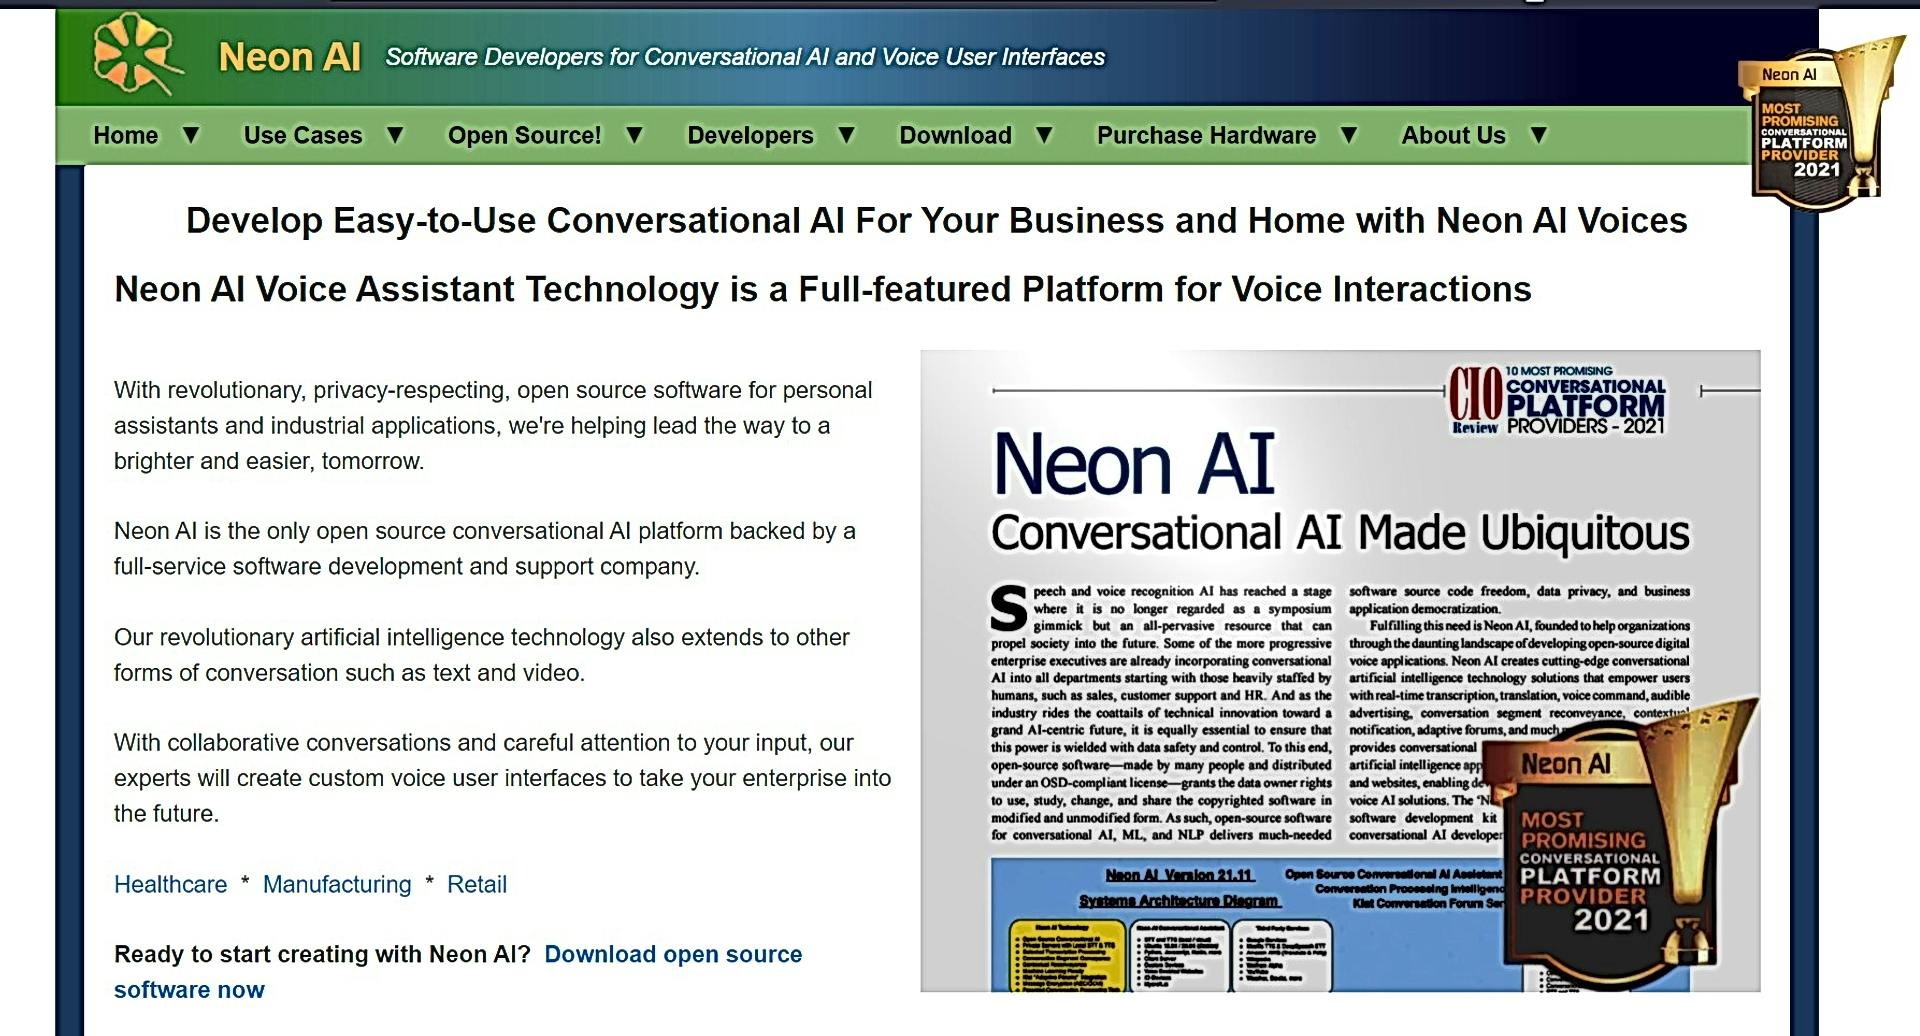 Neon AI featured